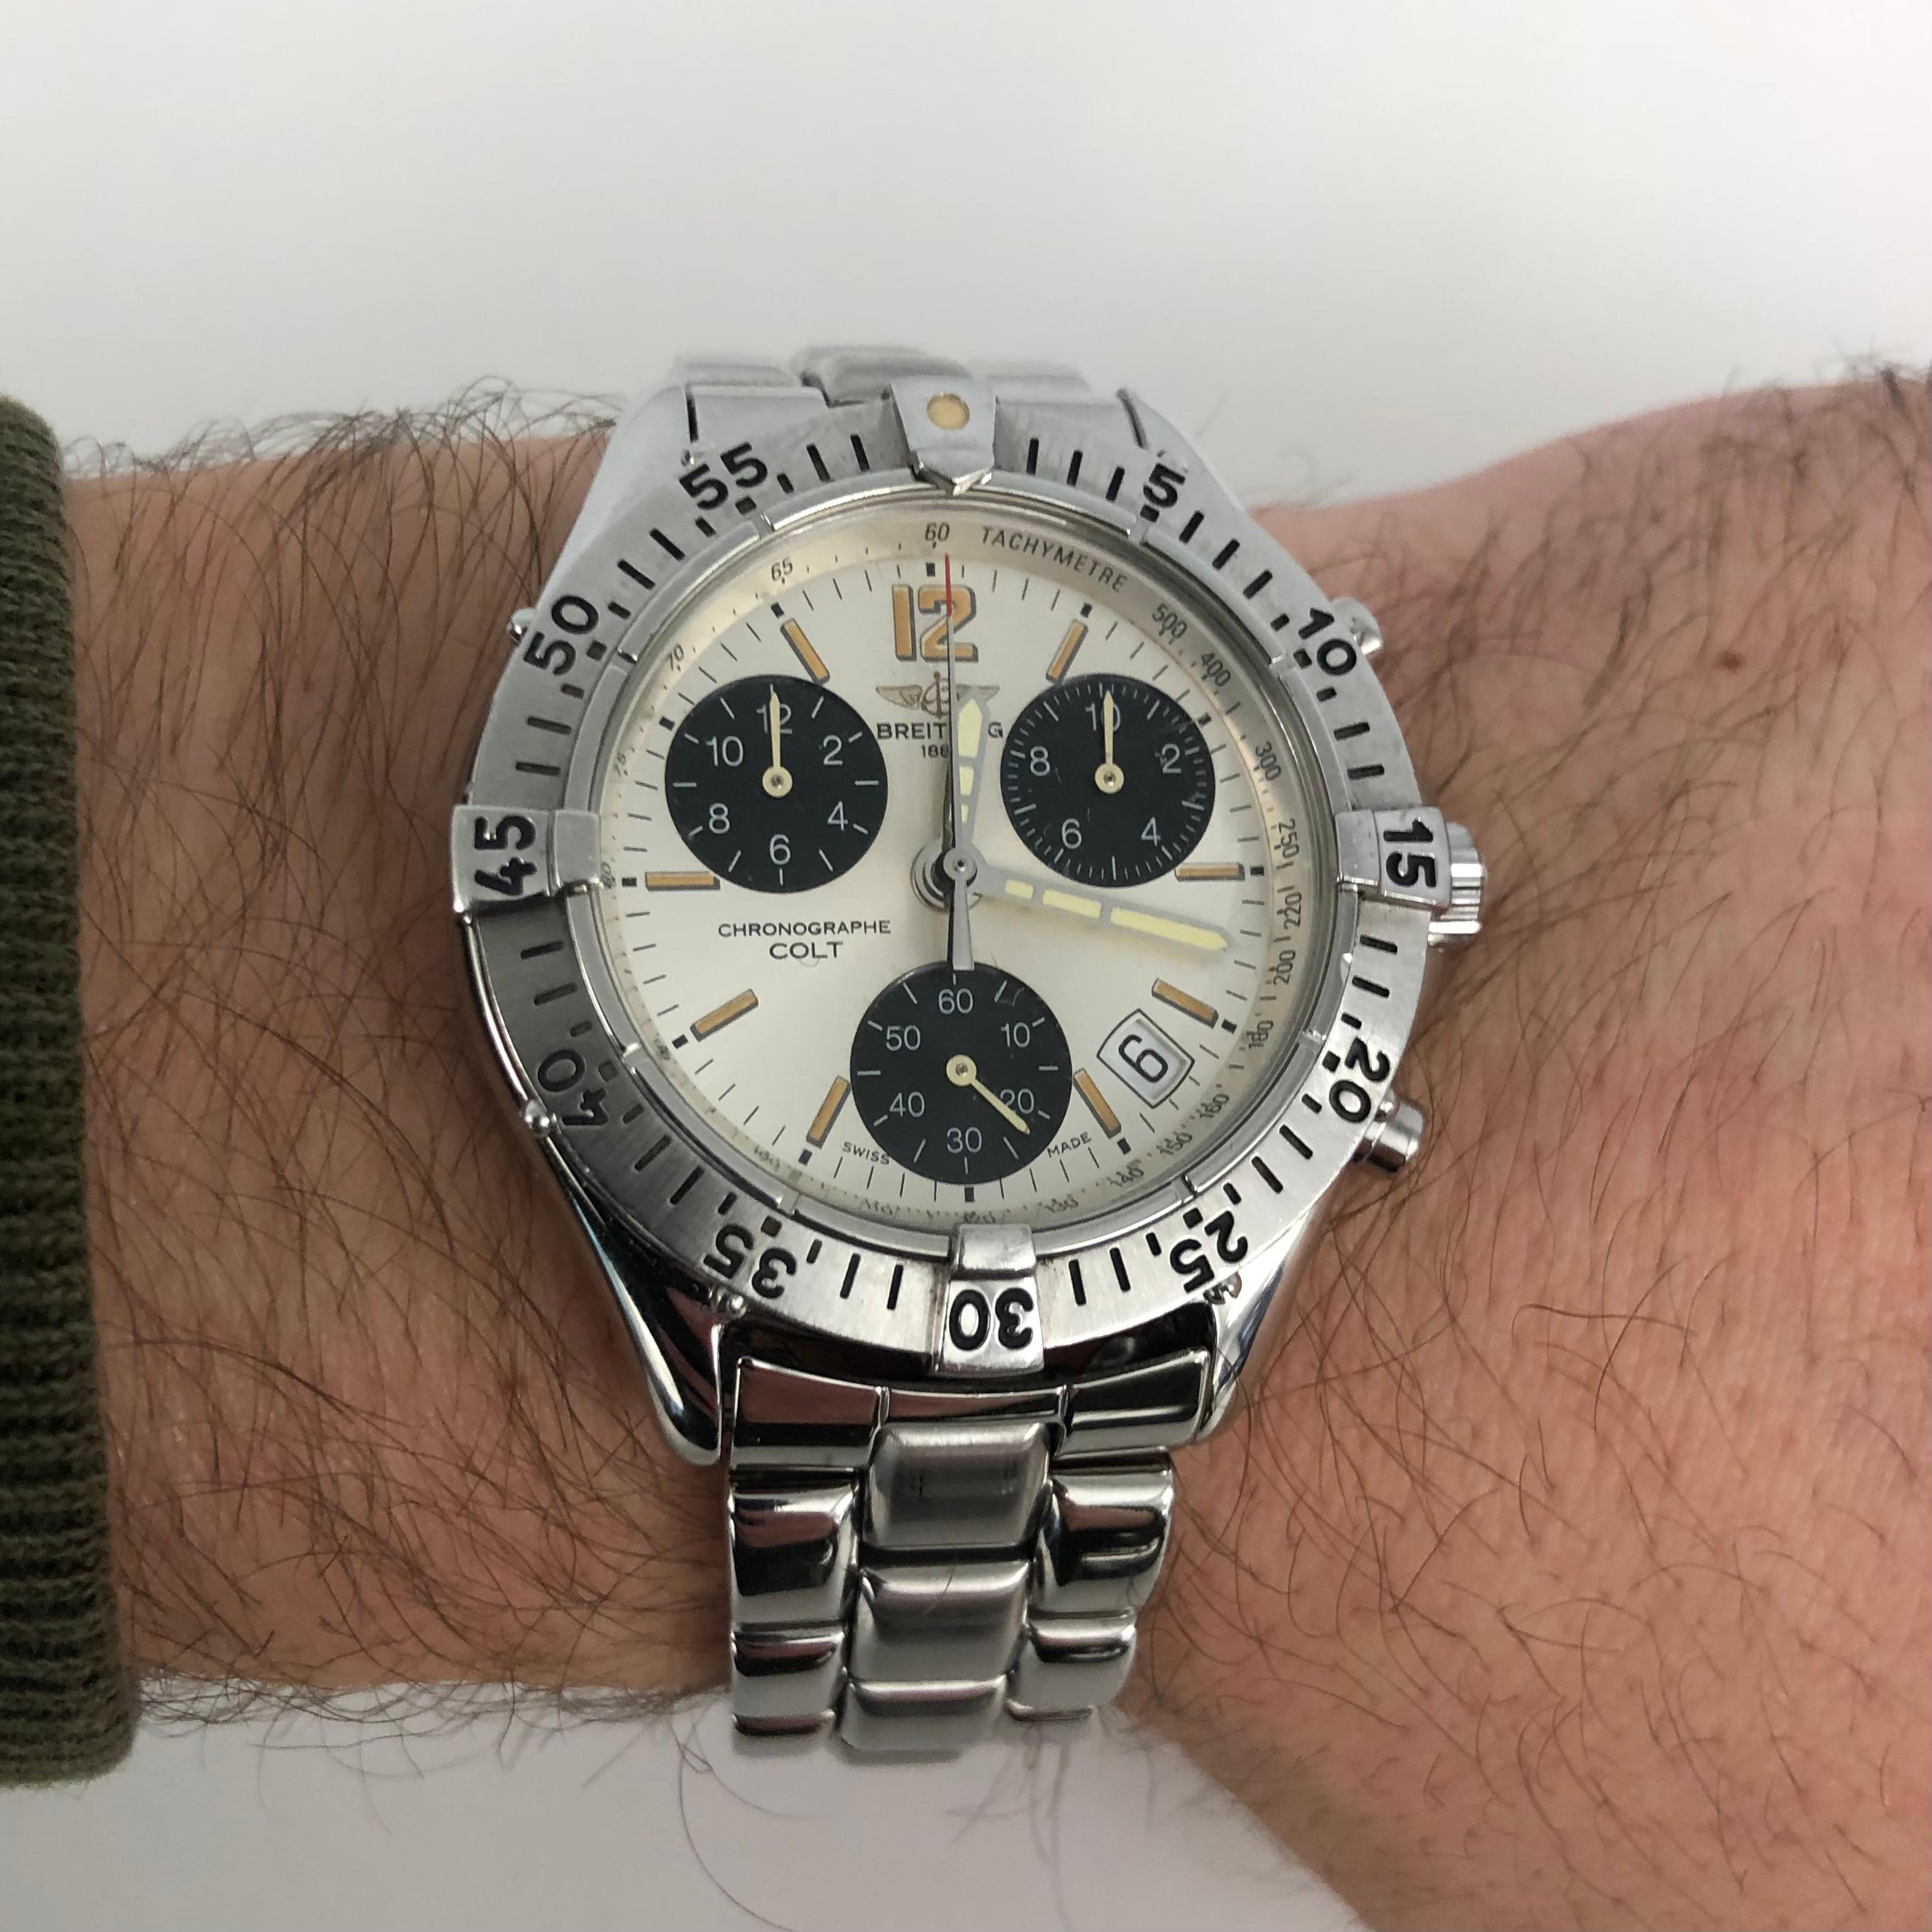 Breitling Colt Chronograph Stainless Steel White Dial Watch A53035.

This 38mm Breitling timepiece features a stainless steel case with a unidirectional rotating bezel and a stainless steel bracelet with folding deployment clasp and safety buckle. A